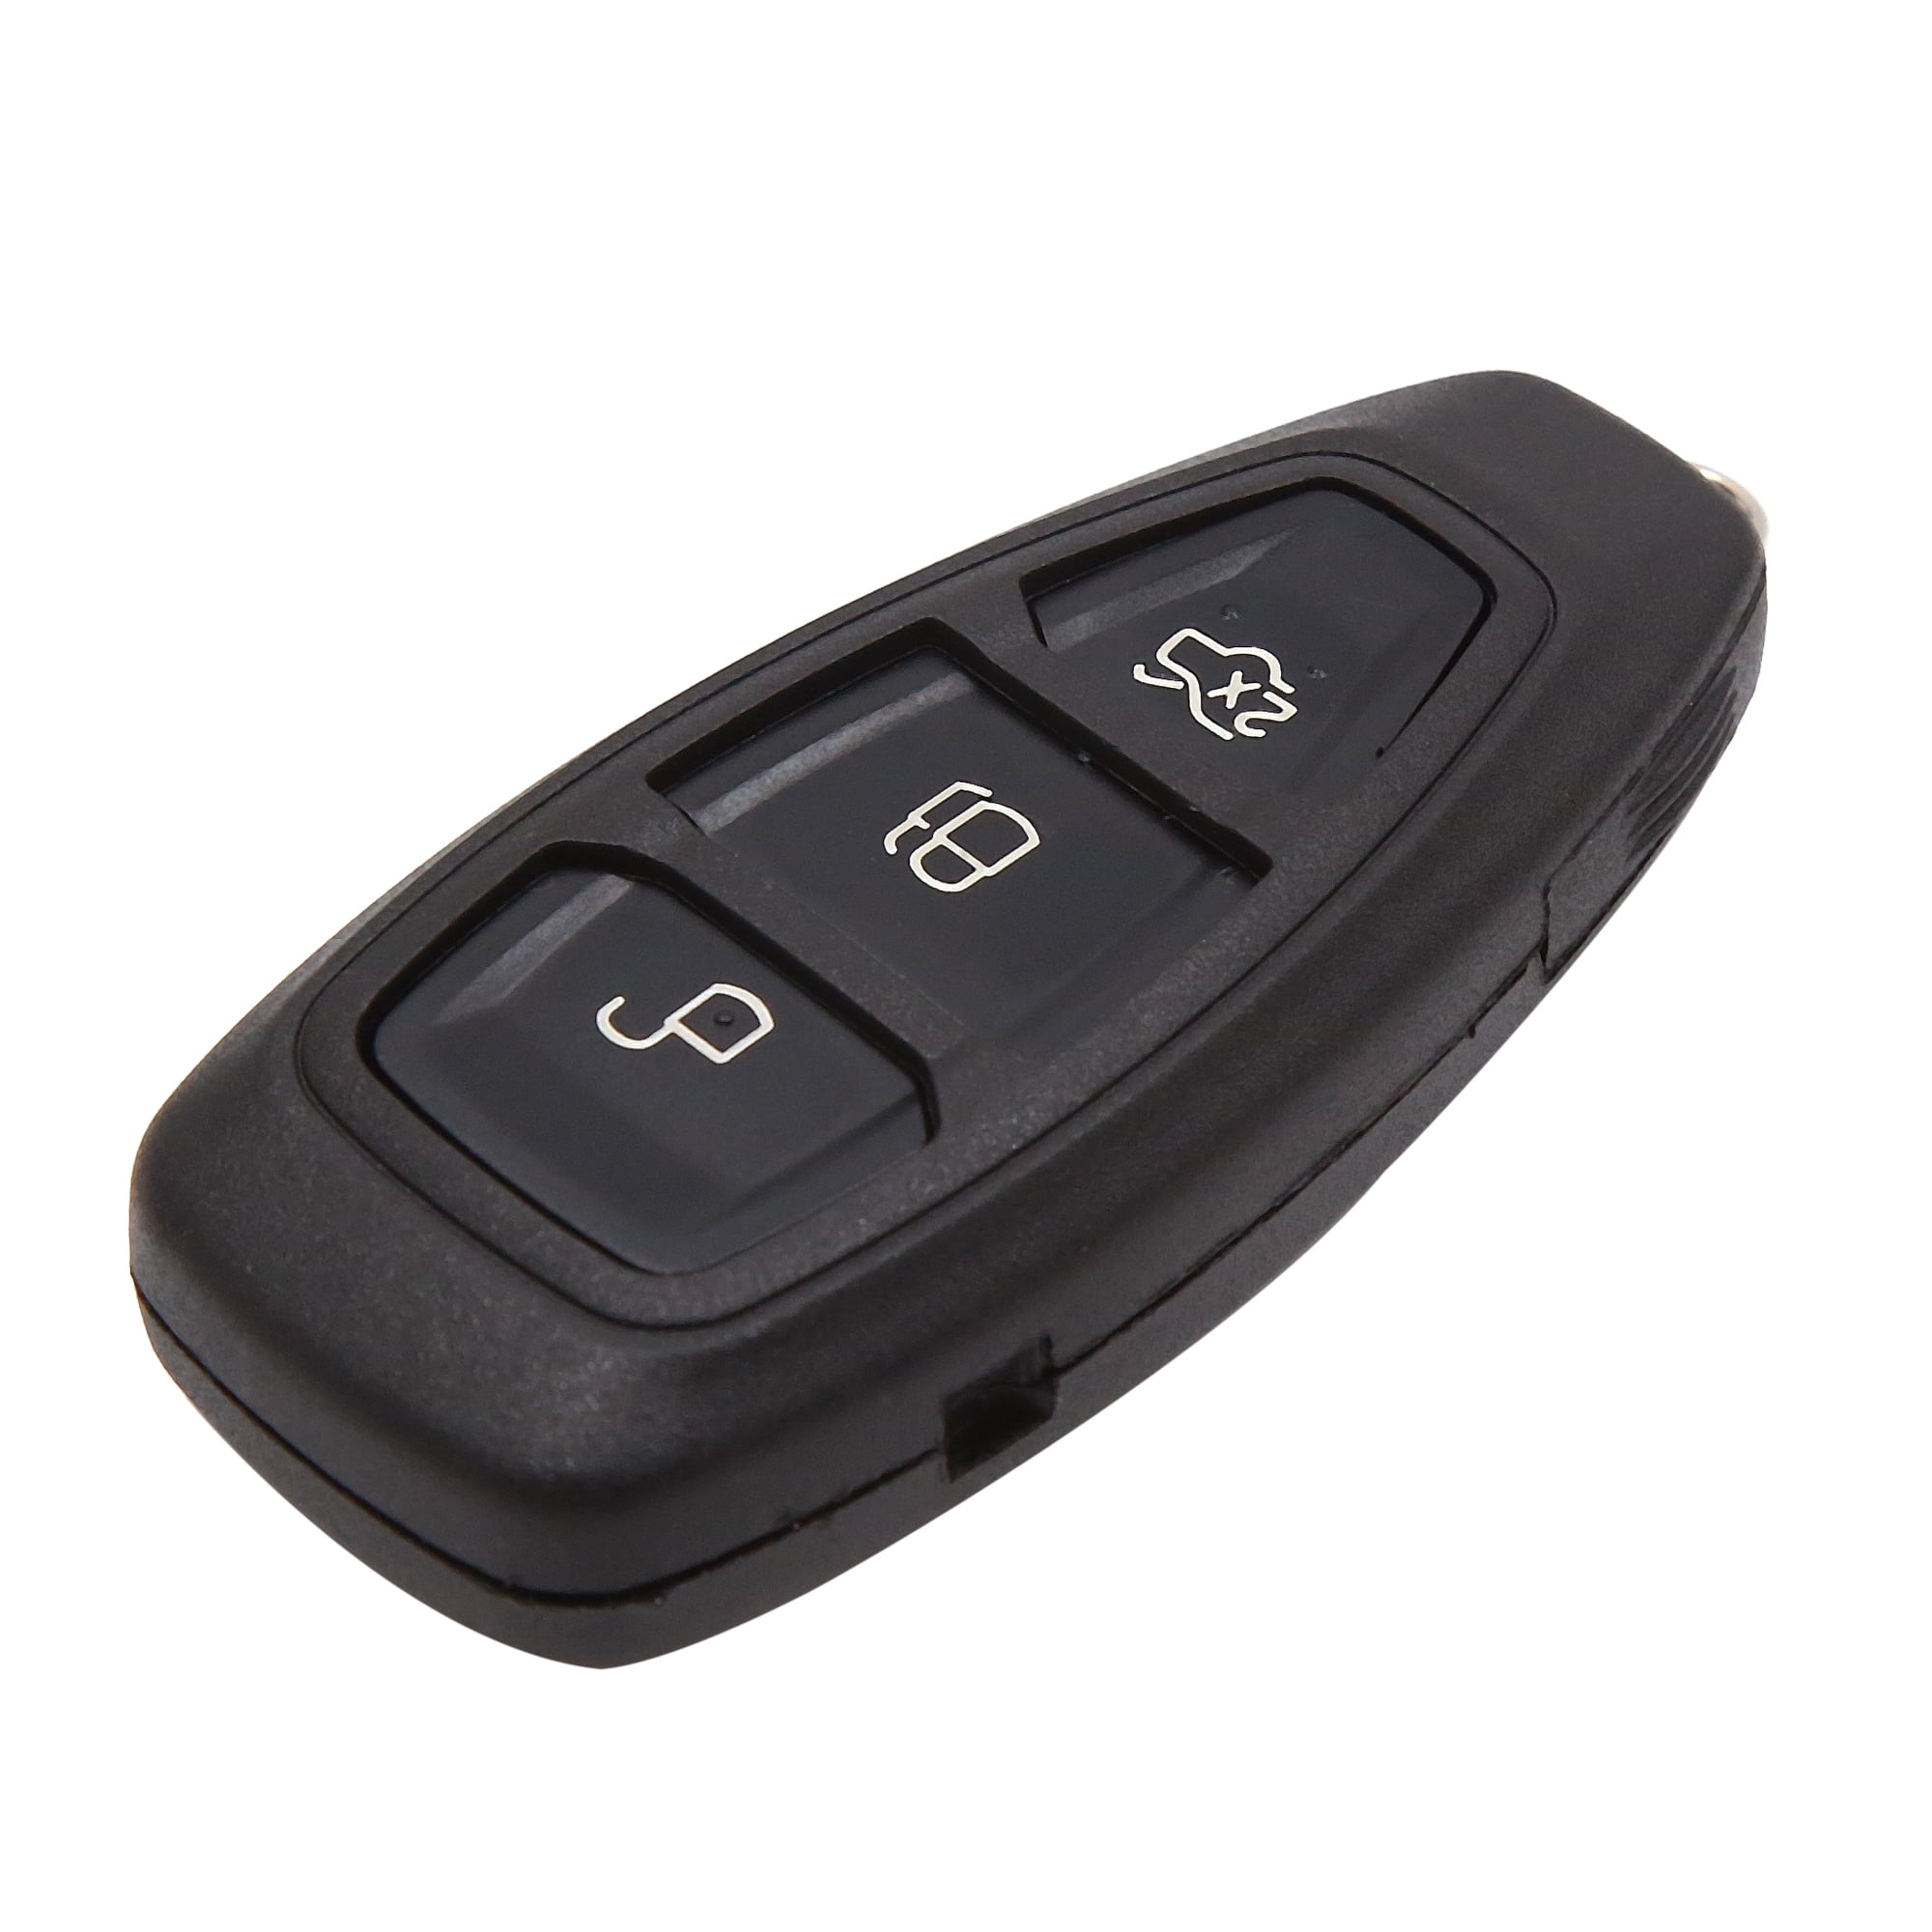 FORD MONDEO FIESTA FOCUS REMOTE SMART KEYLESS KEY FOB 3 BUTTON COVER 3 